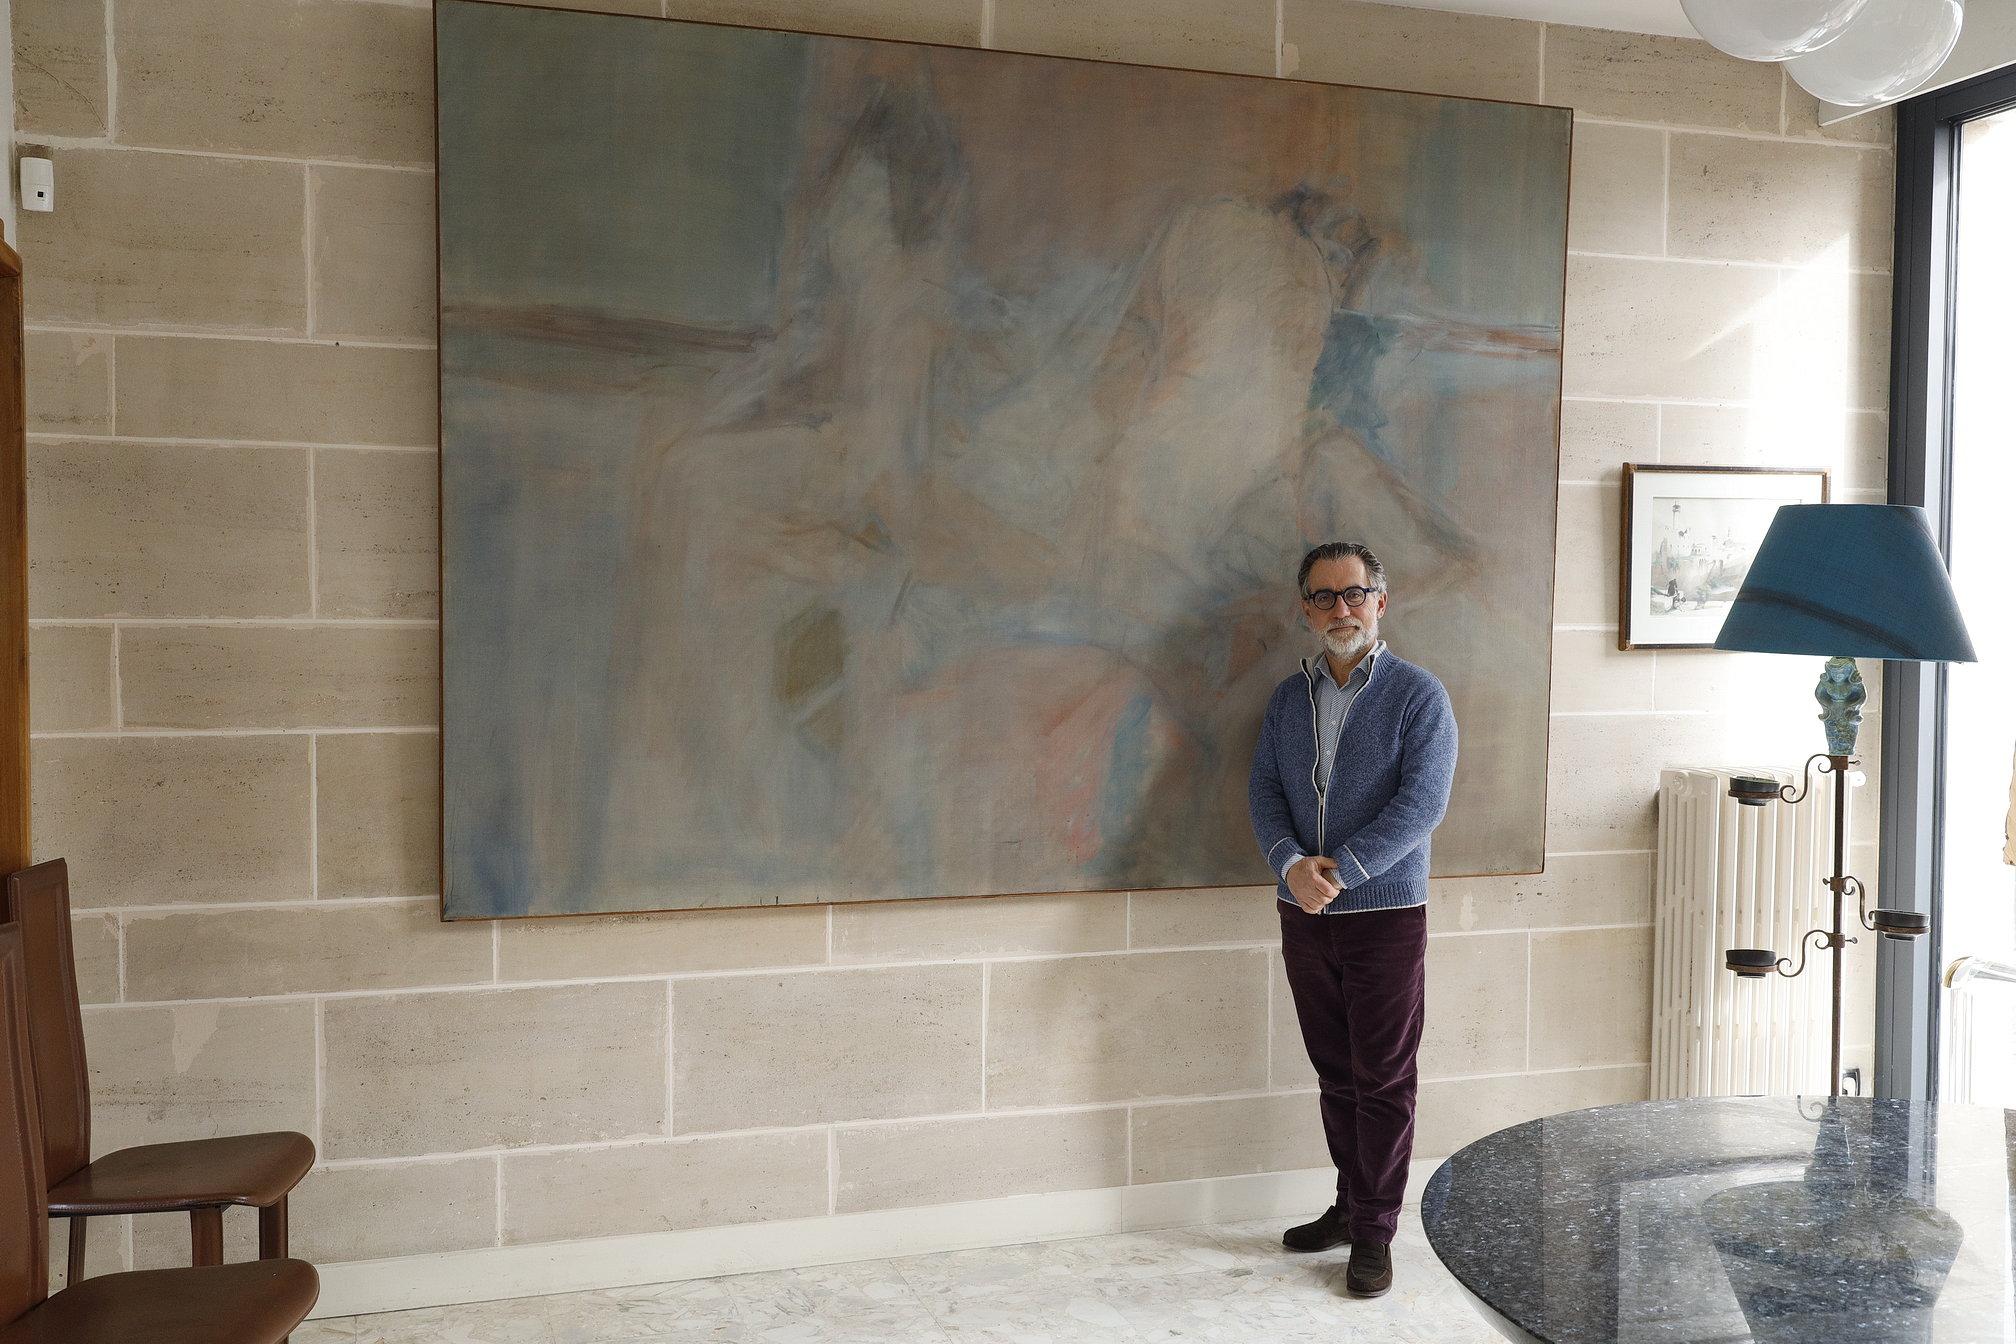 A very large oil on canvas signed by Jean Paul Barray and dated 1964. After graduating from Arts et Métiers in Saint-Étienne, he went on to study architecture at the Beaux-Arts in Lyon, working with the great names in architecture and design: Le